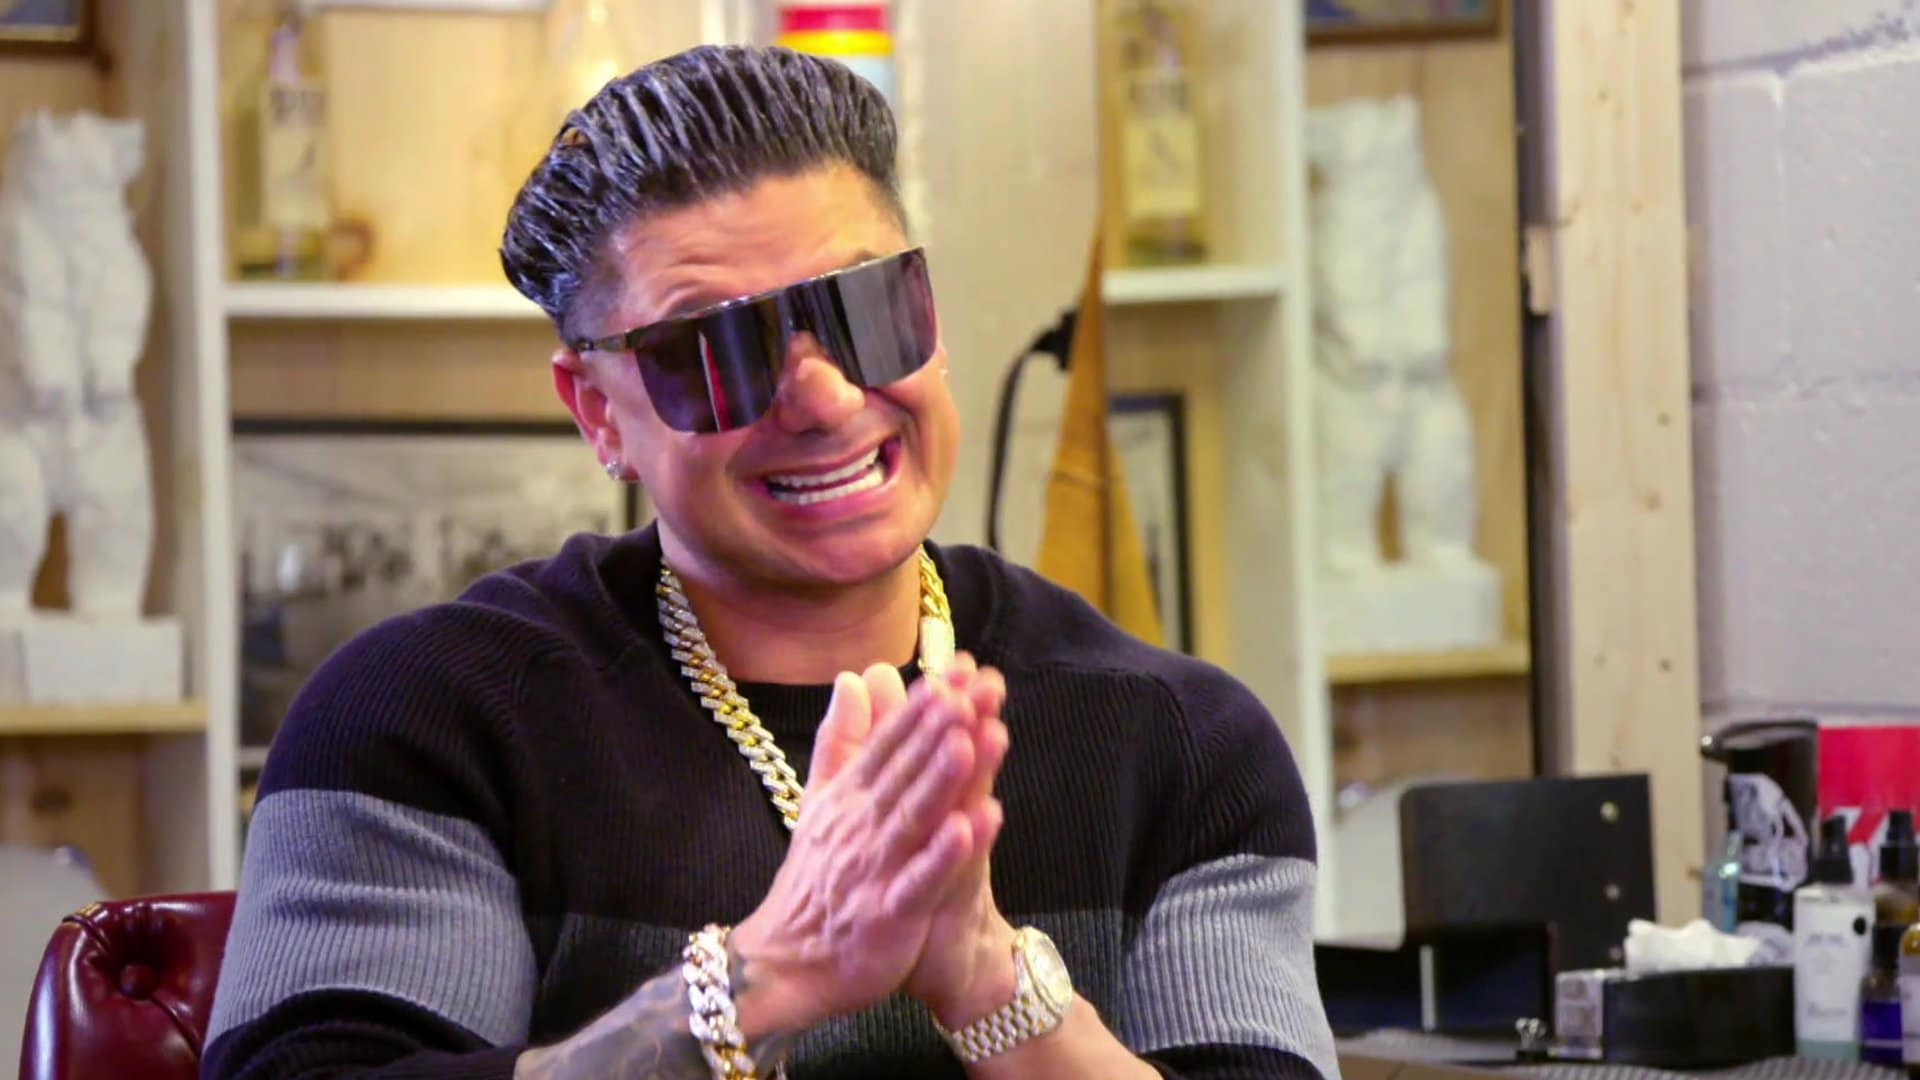 Revenge Prank With Dj Pauly D And Vinny S1e3 The Prank With The Flash Drive